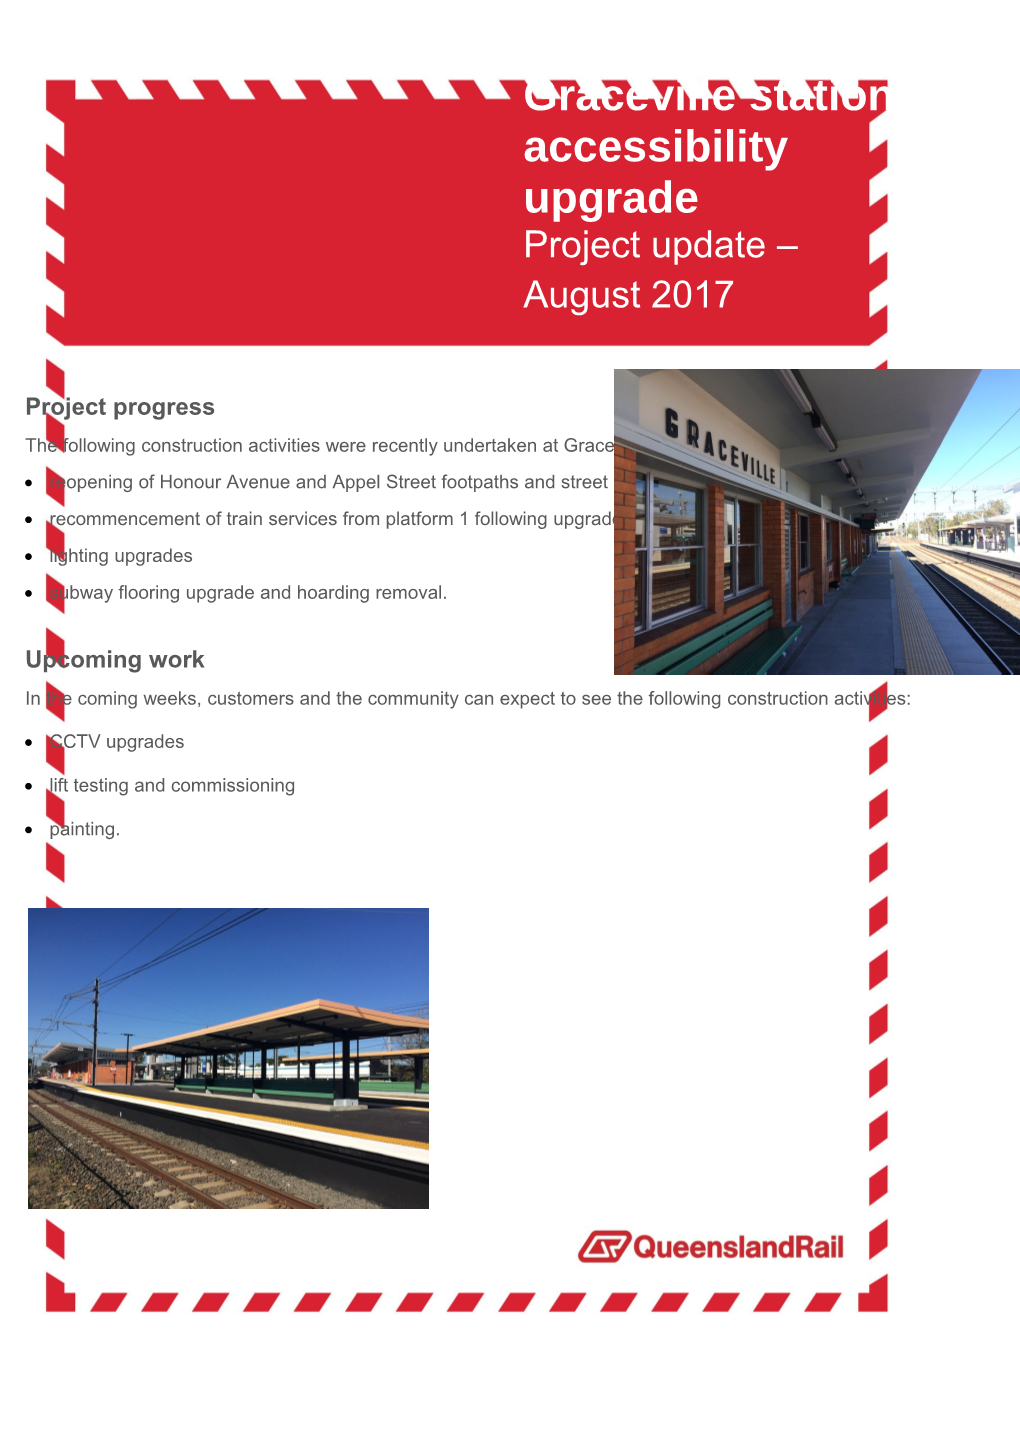 Graceville Station Accessibility Upgrade